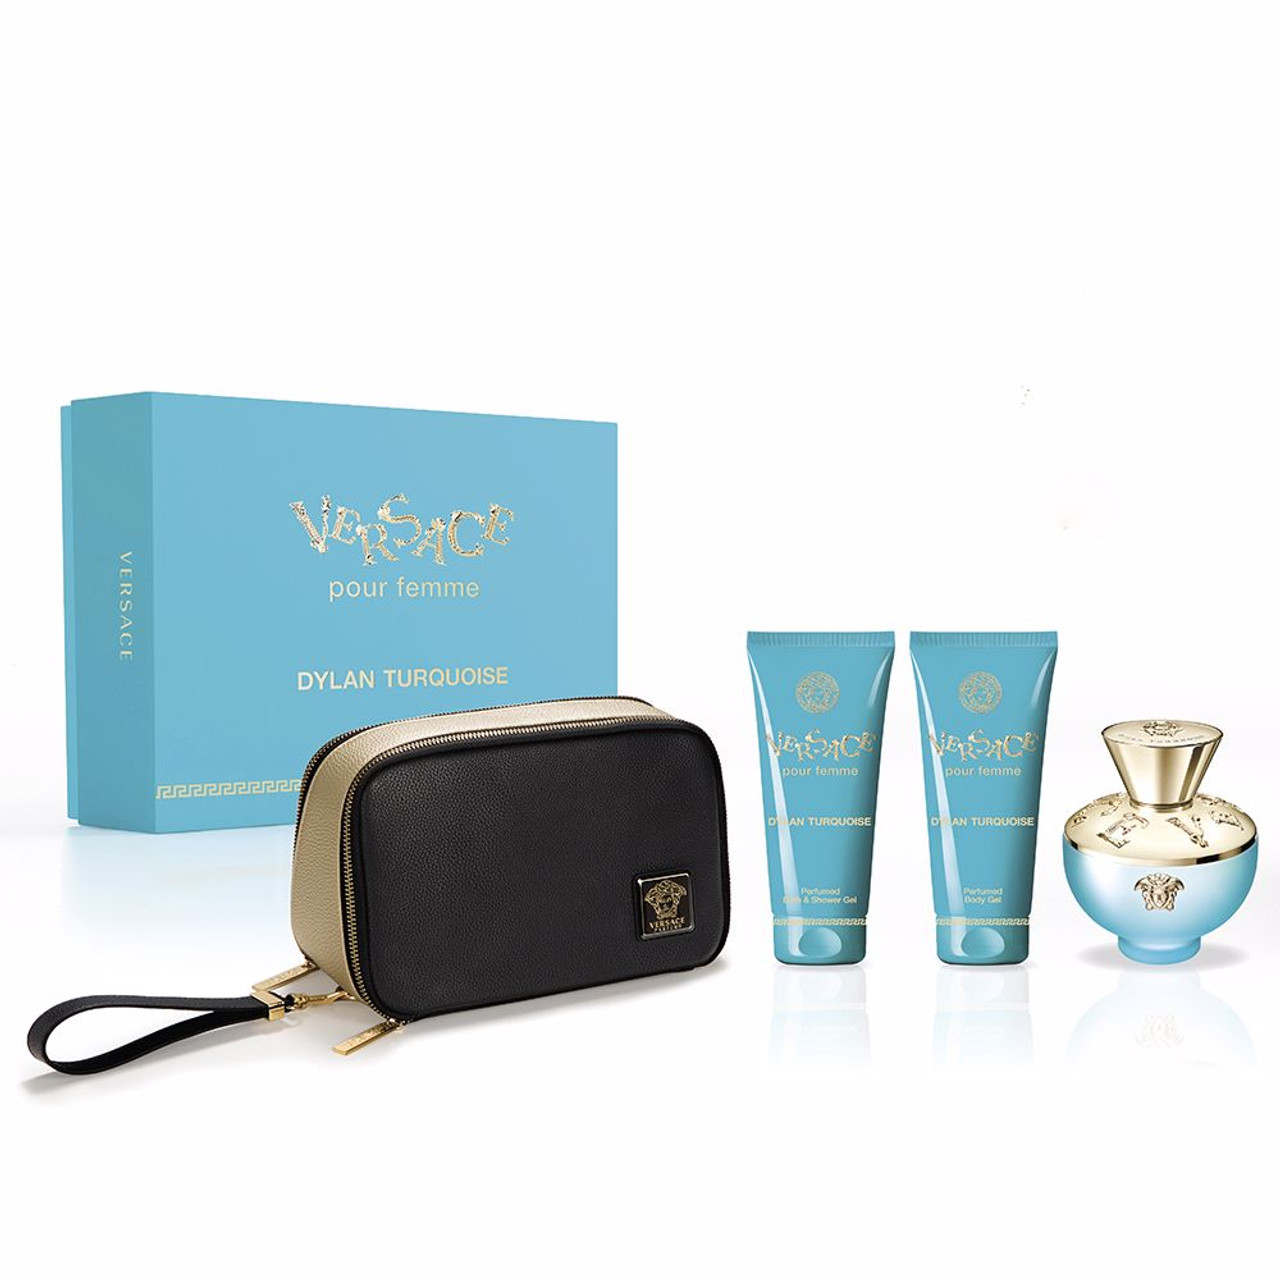 VERSACE DYLAN TURQUOISE 4PC GIFT SET - 3.4OZ EDT + 3.4OZ BODY